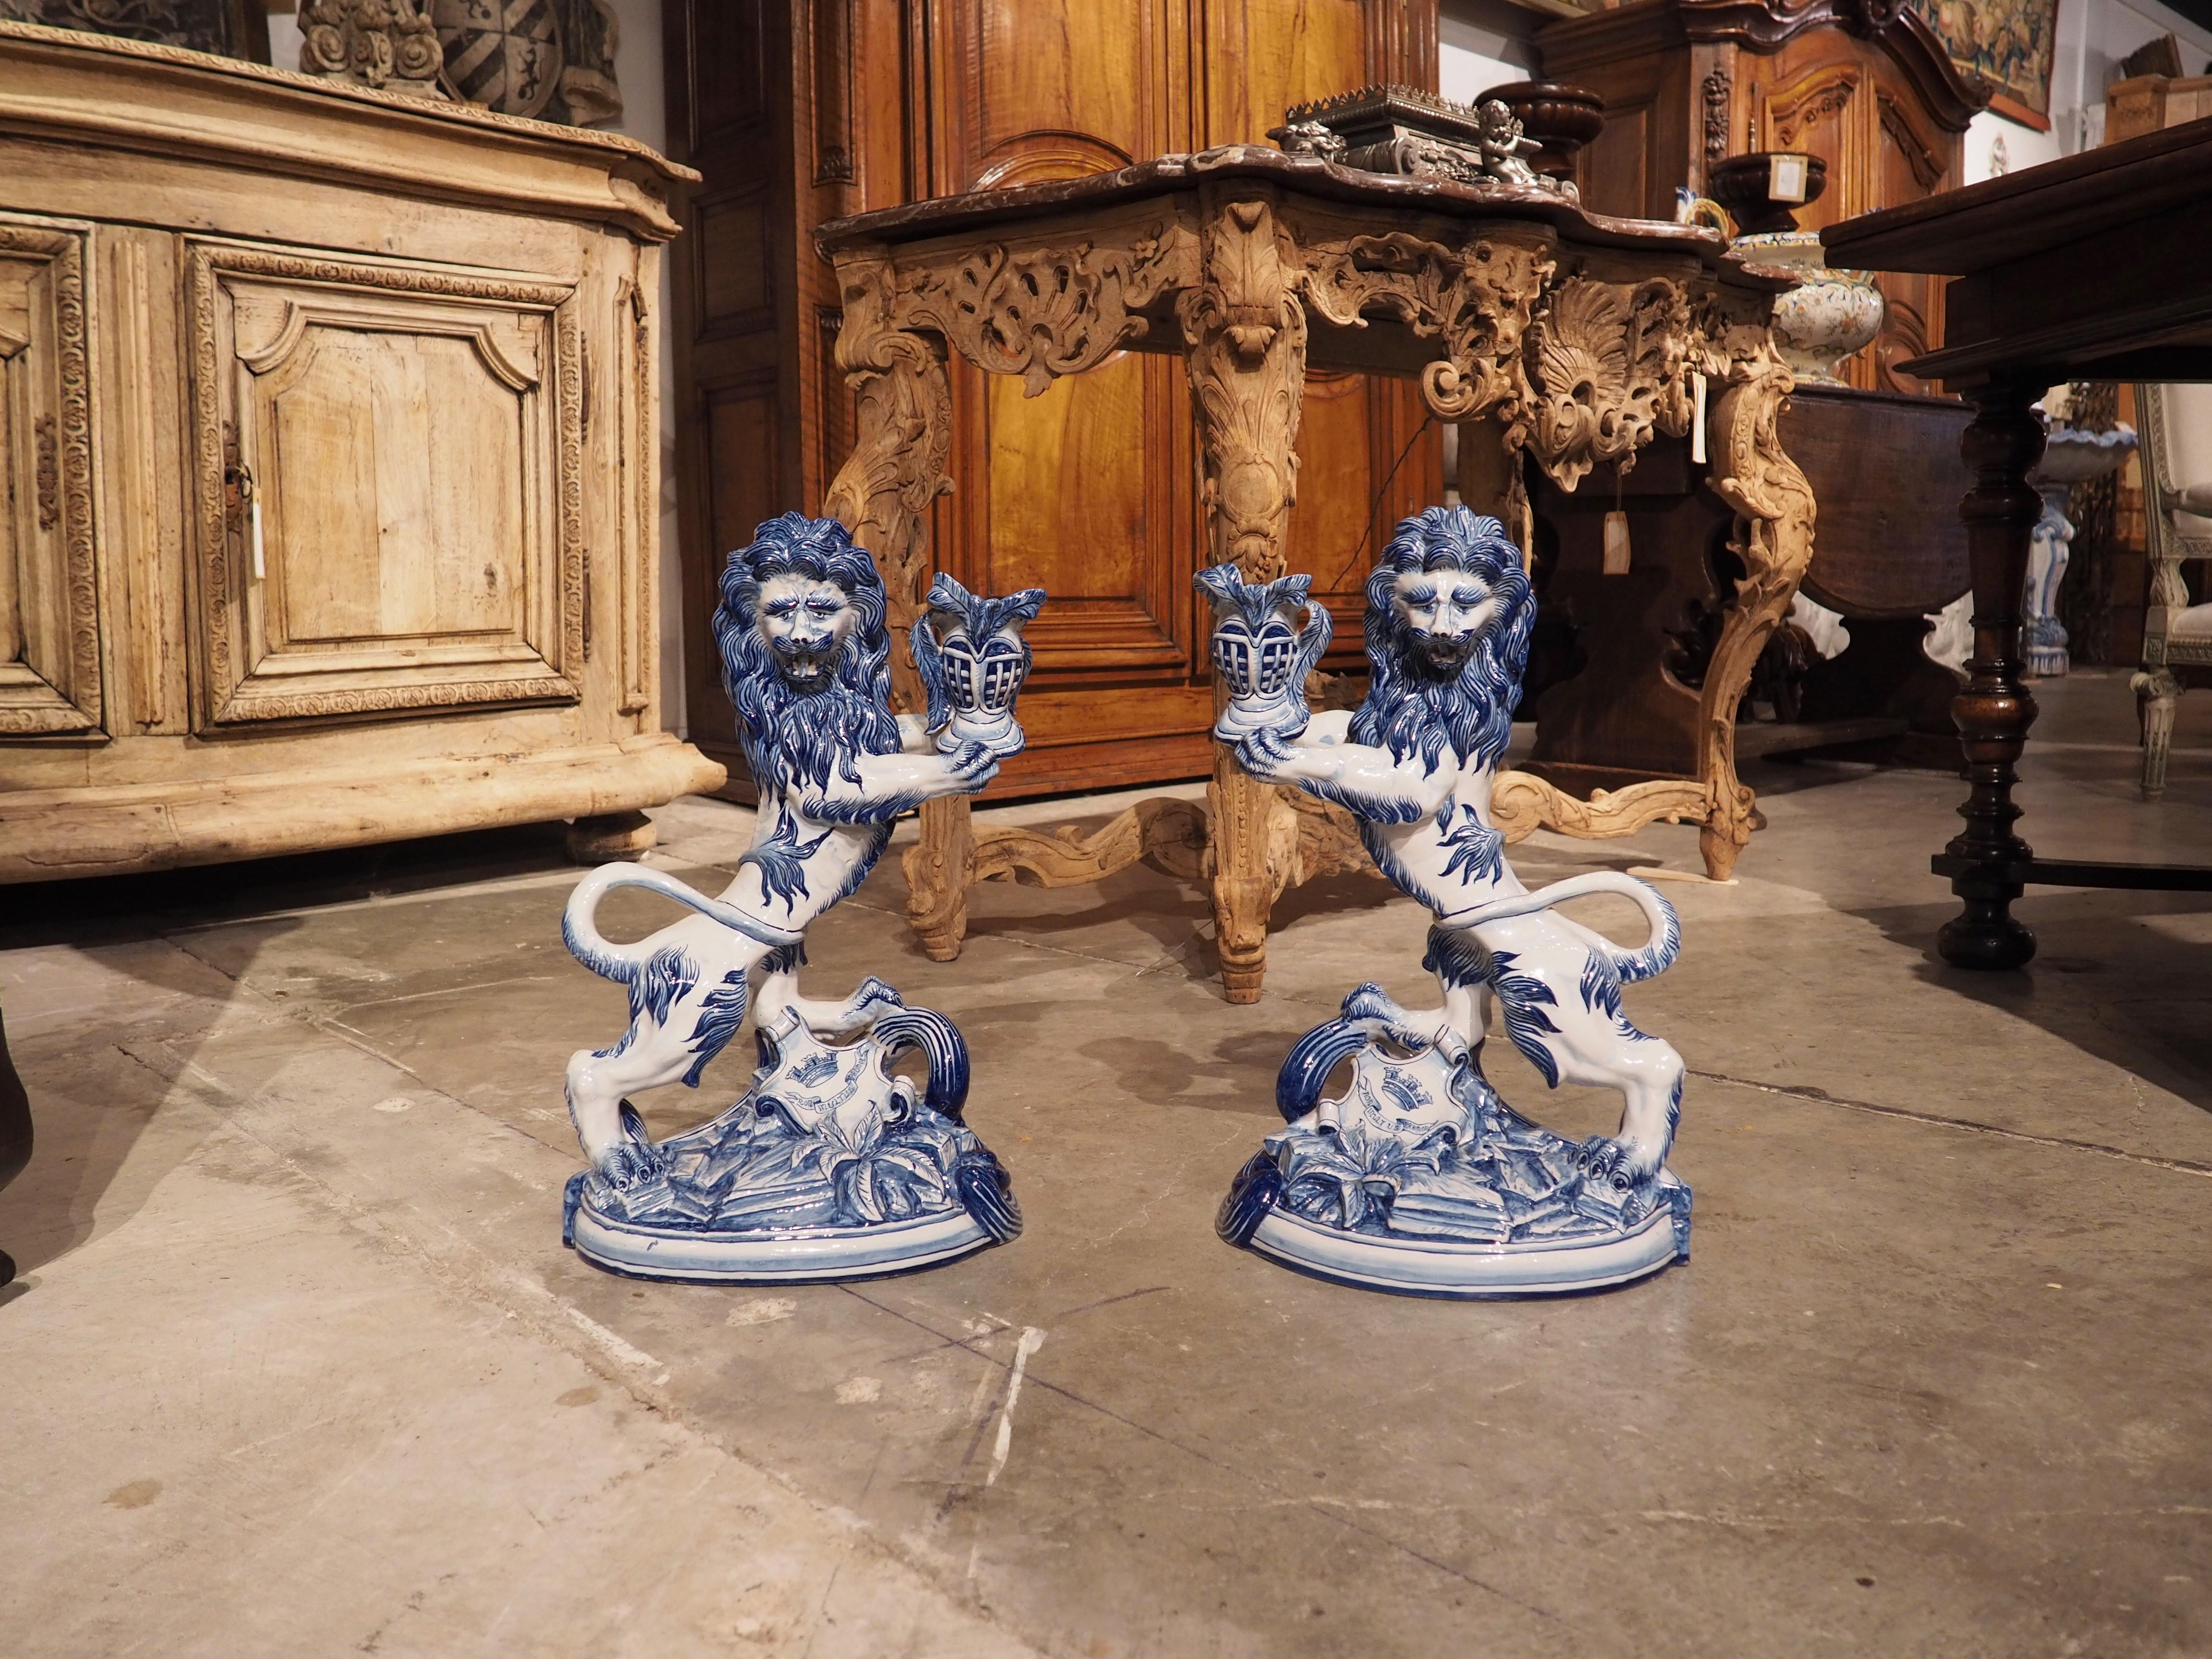 A beautiful pair of hand-painted cobalt blue and white candle holders, these faience lions date to circa 1890. Based on production marks located under the rear paw of each lion, the candle holders were produced in Saint-Clément, by Keller & Guerin,